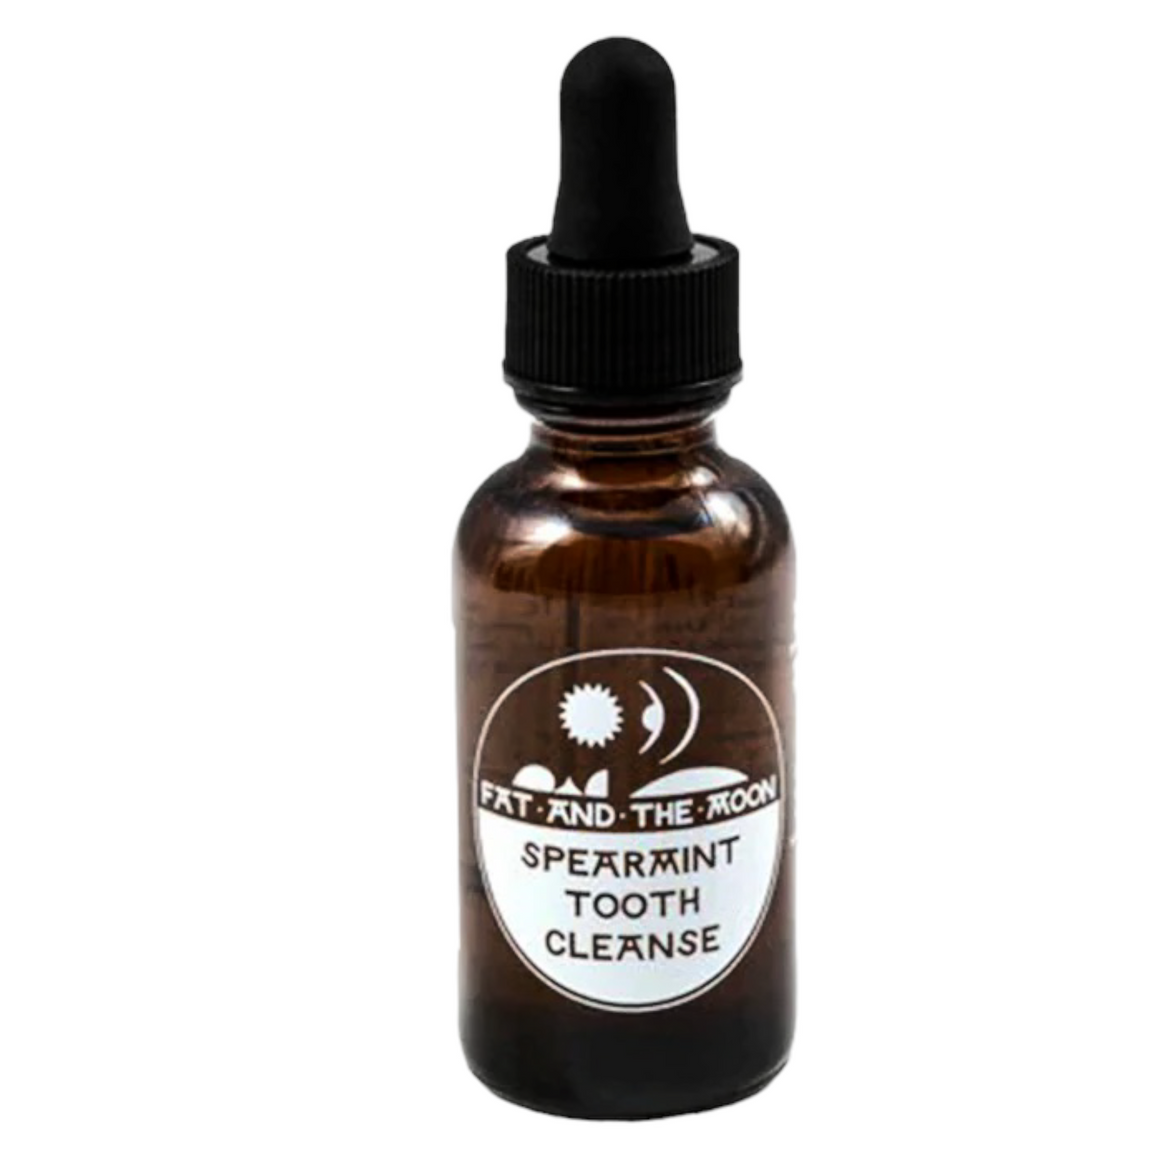 Spearmint Tooth Cleanse 1oz - Fat &amp; The Moon